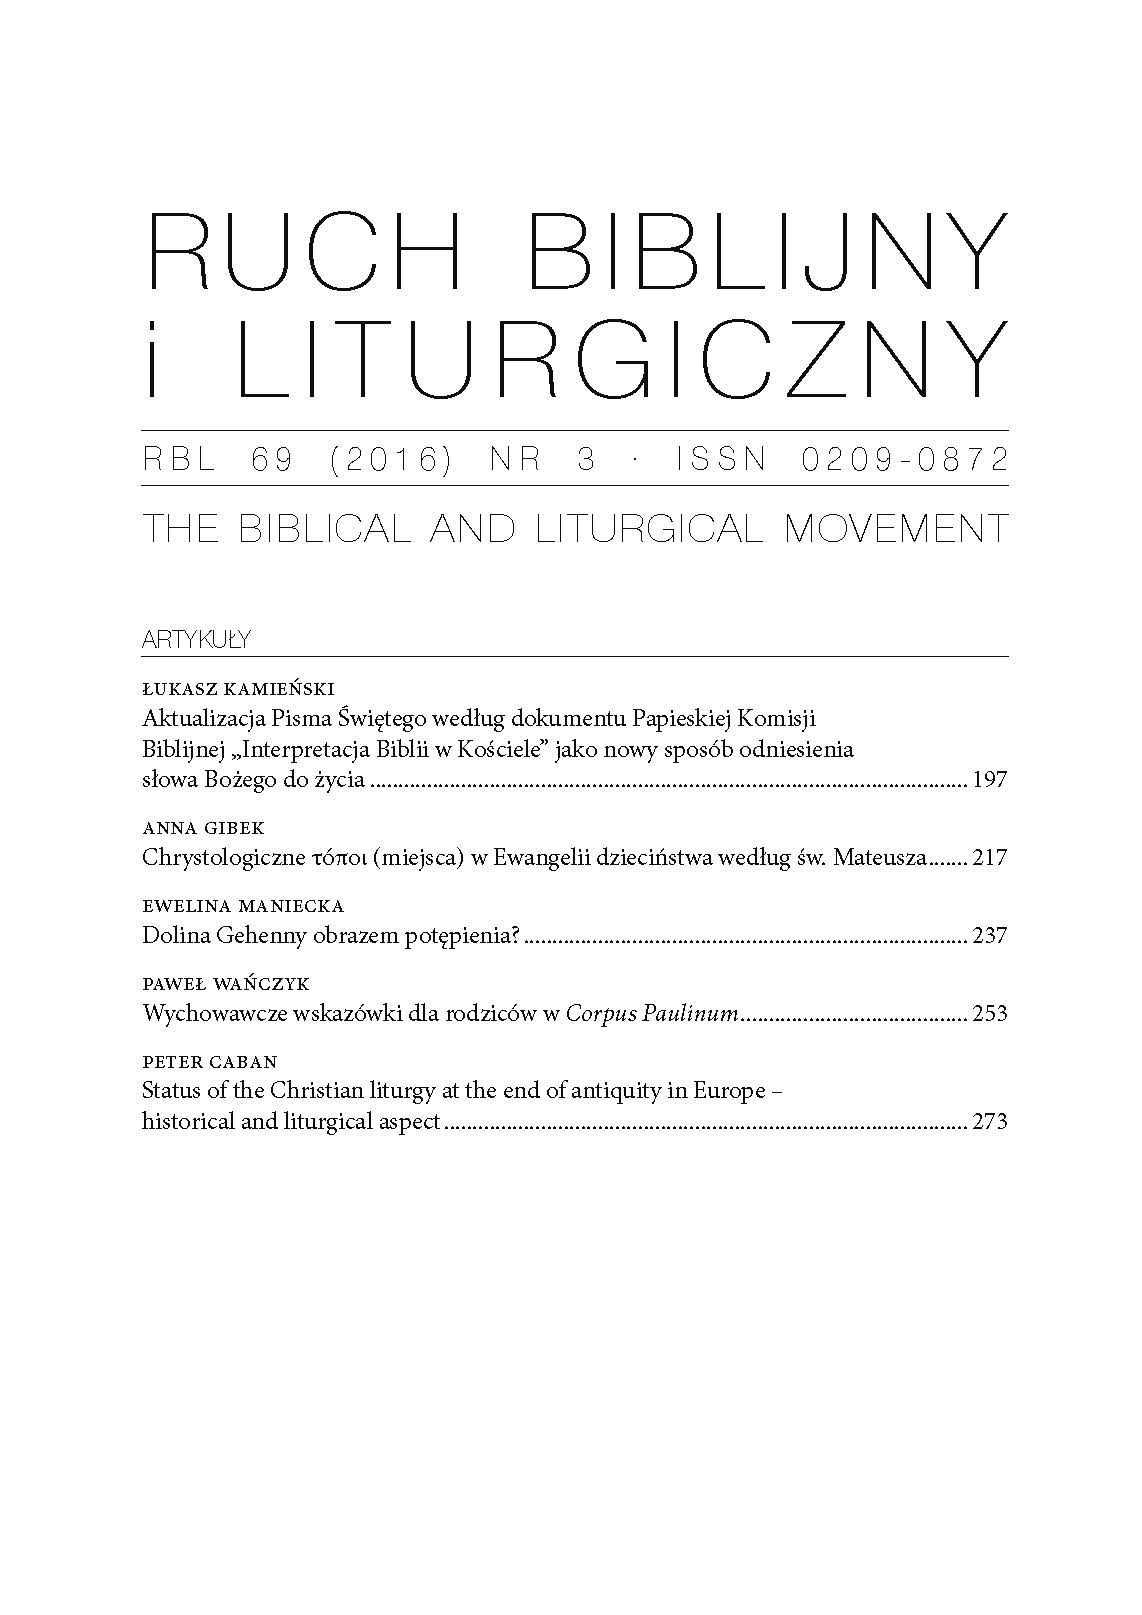 Annual Report of the President of the Polish Theological Society for 2012